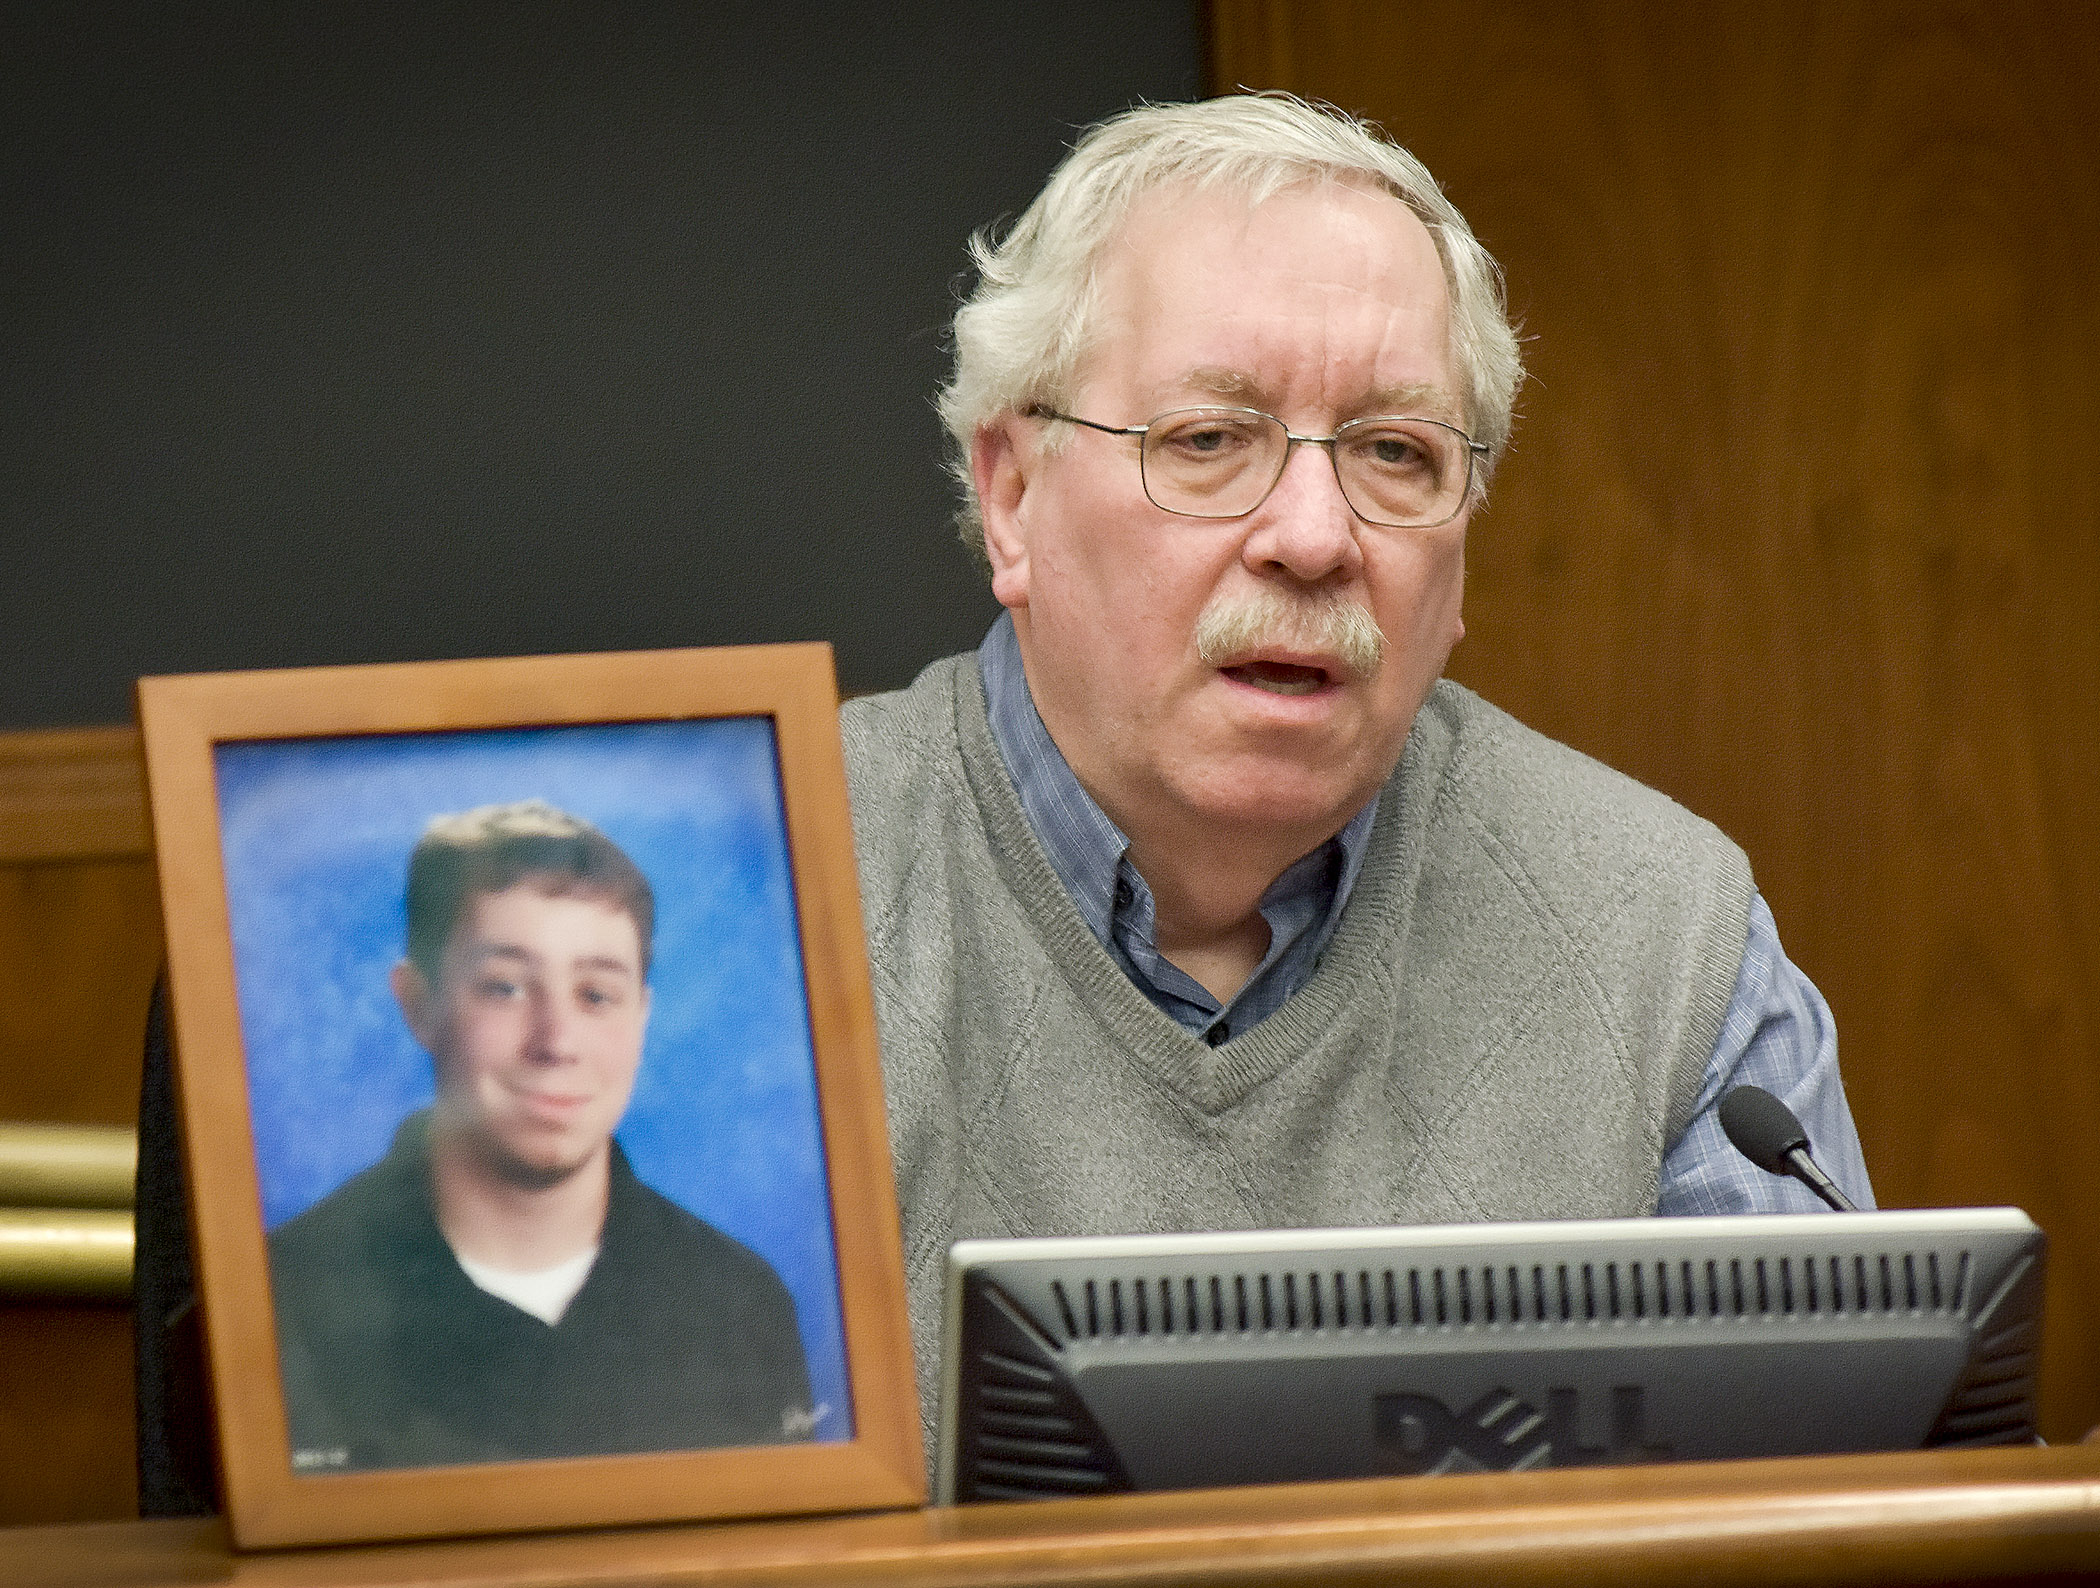 John Dudley, whose son, Andrew, was killed by a distracted driver, testifies before the House Transportation and Regional Governance Policy Committee in support of a bill that would mandate hands free cell phone use while driving. Photo by Andrew VonBank